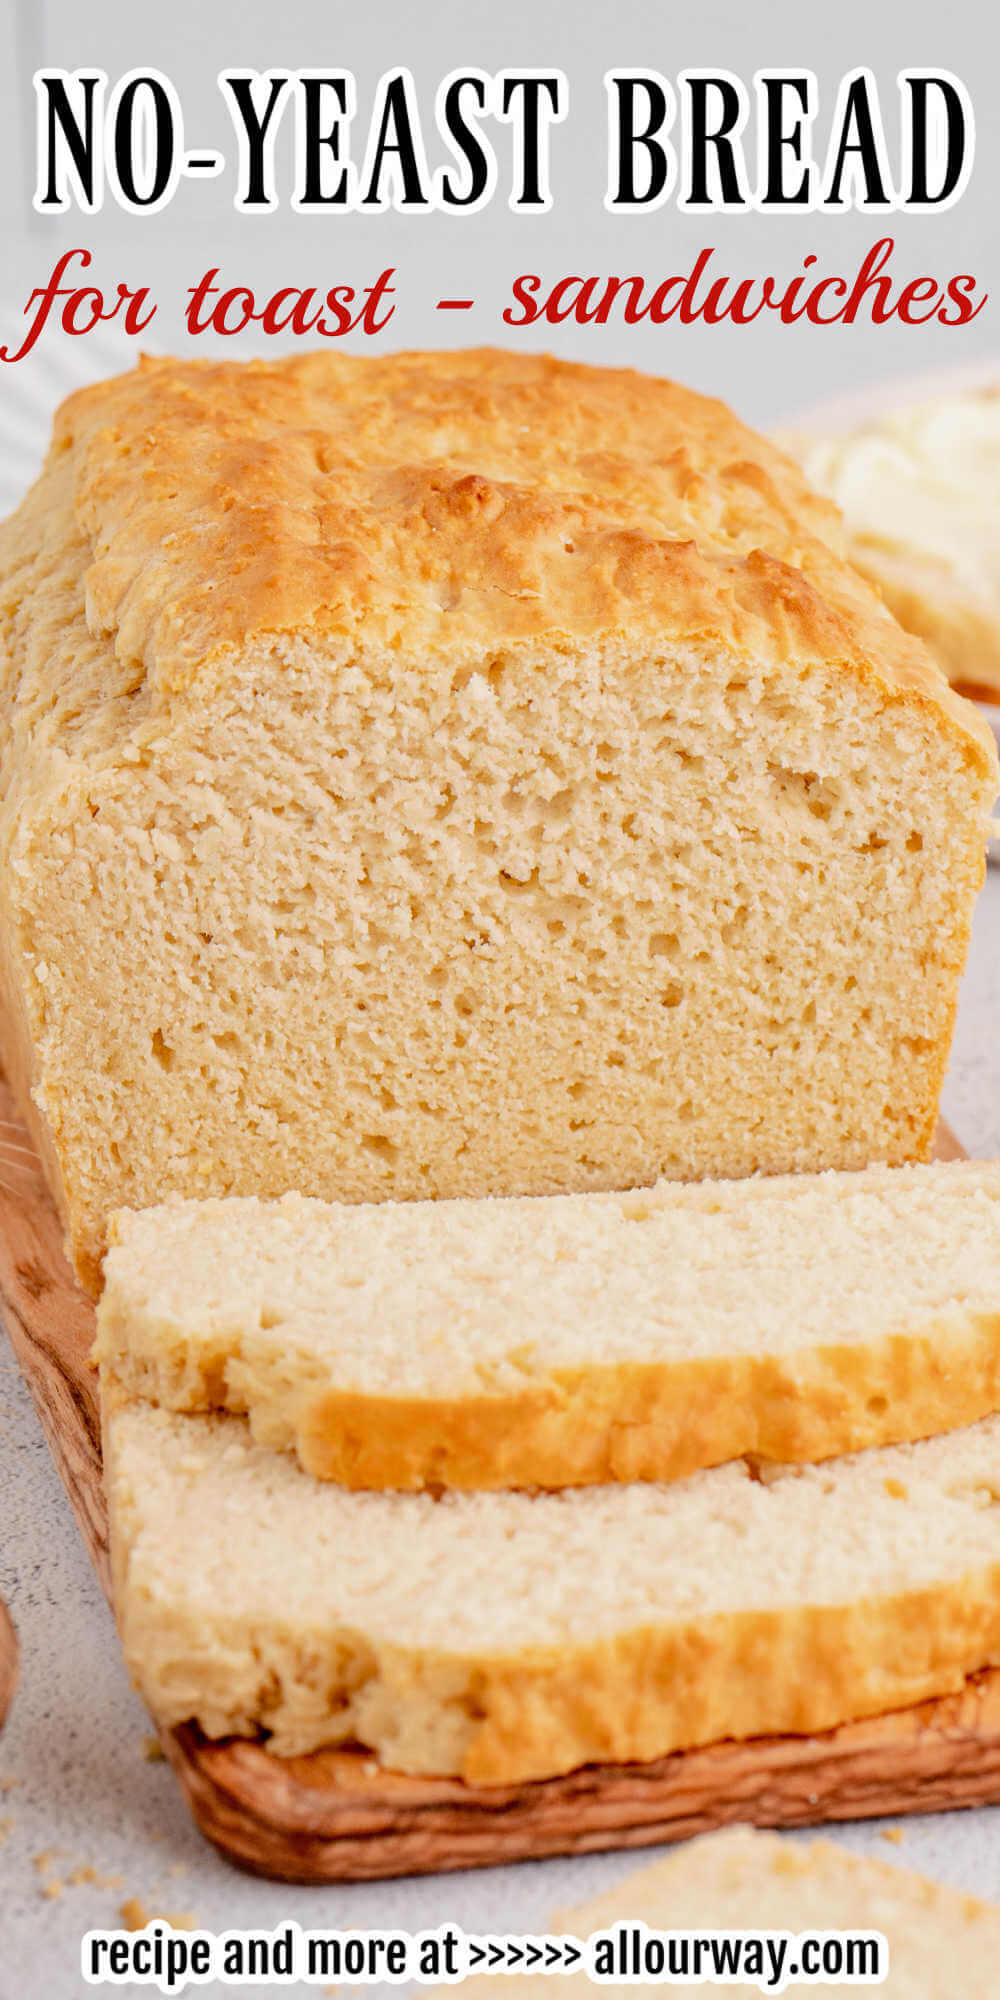 This No Yeast Bread is a great recipe for anyone starting out with making their own bread from scratch. The dough can easily be mixed by hand and you won’t even need to allow additional time for the bread to rise prior to baking! 